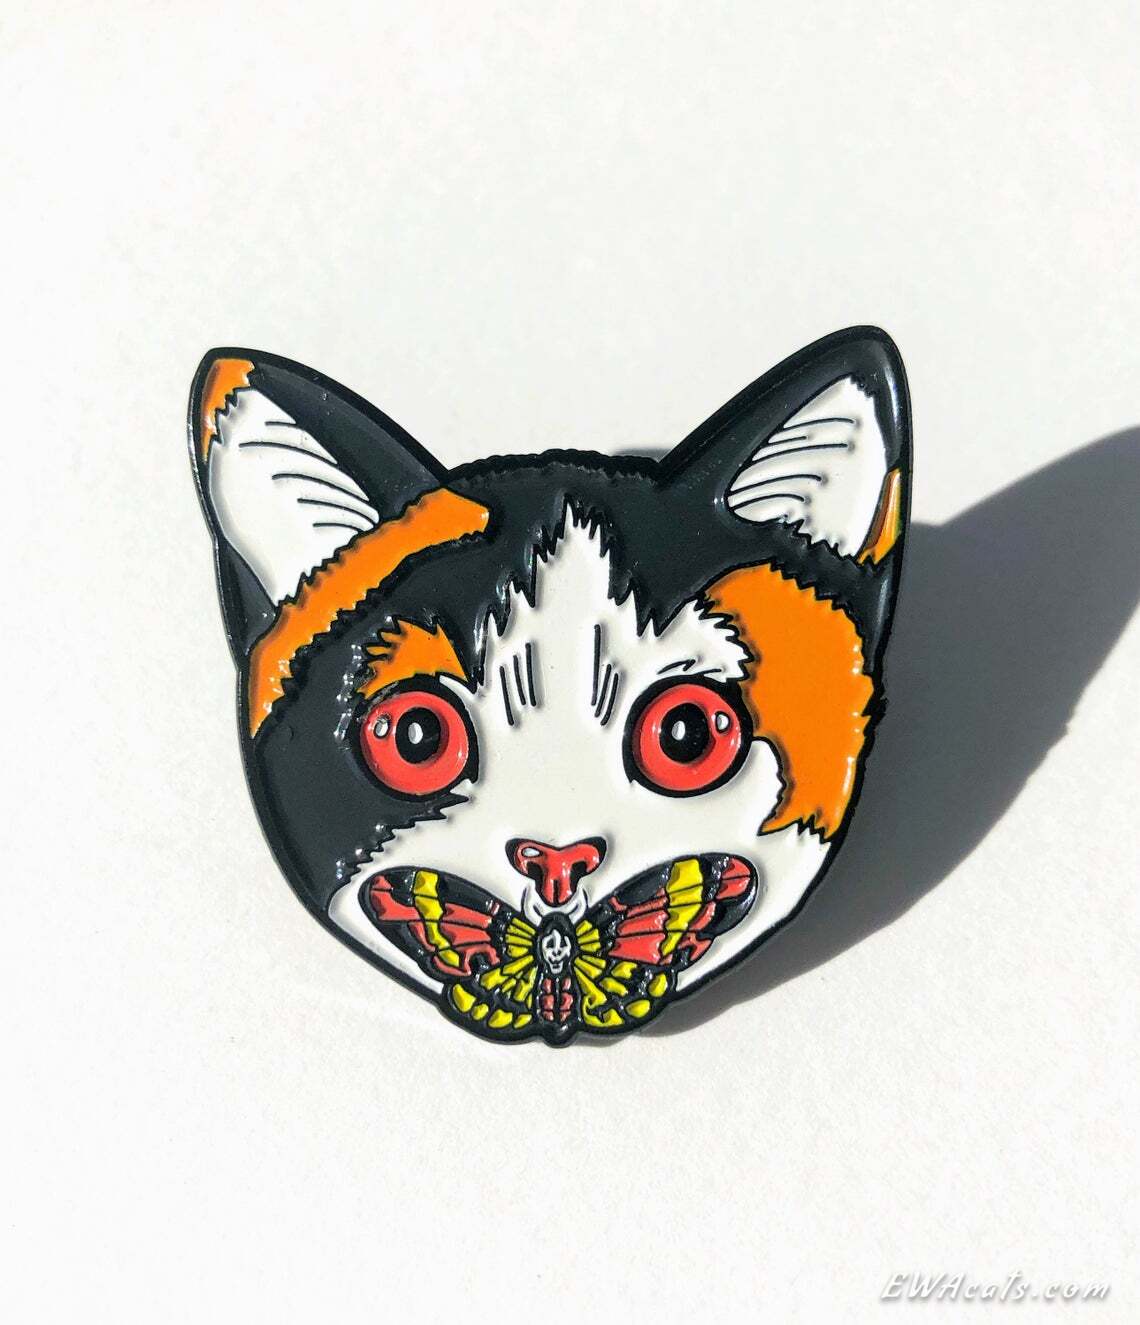 ENAMEL PIN "Silence of the Cats"